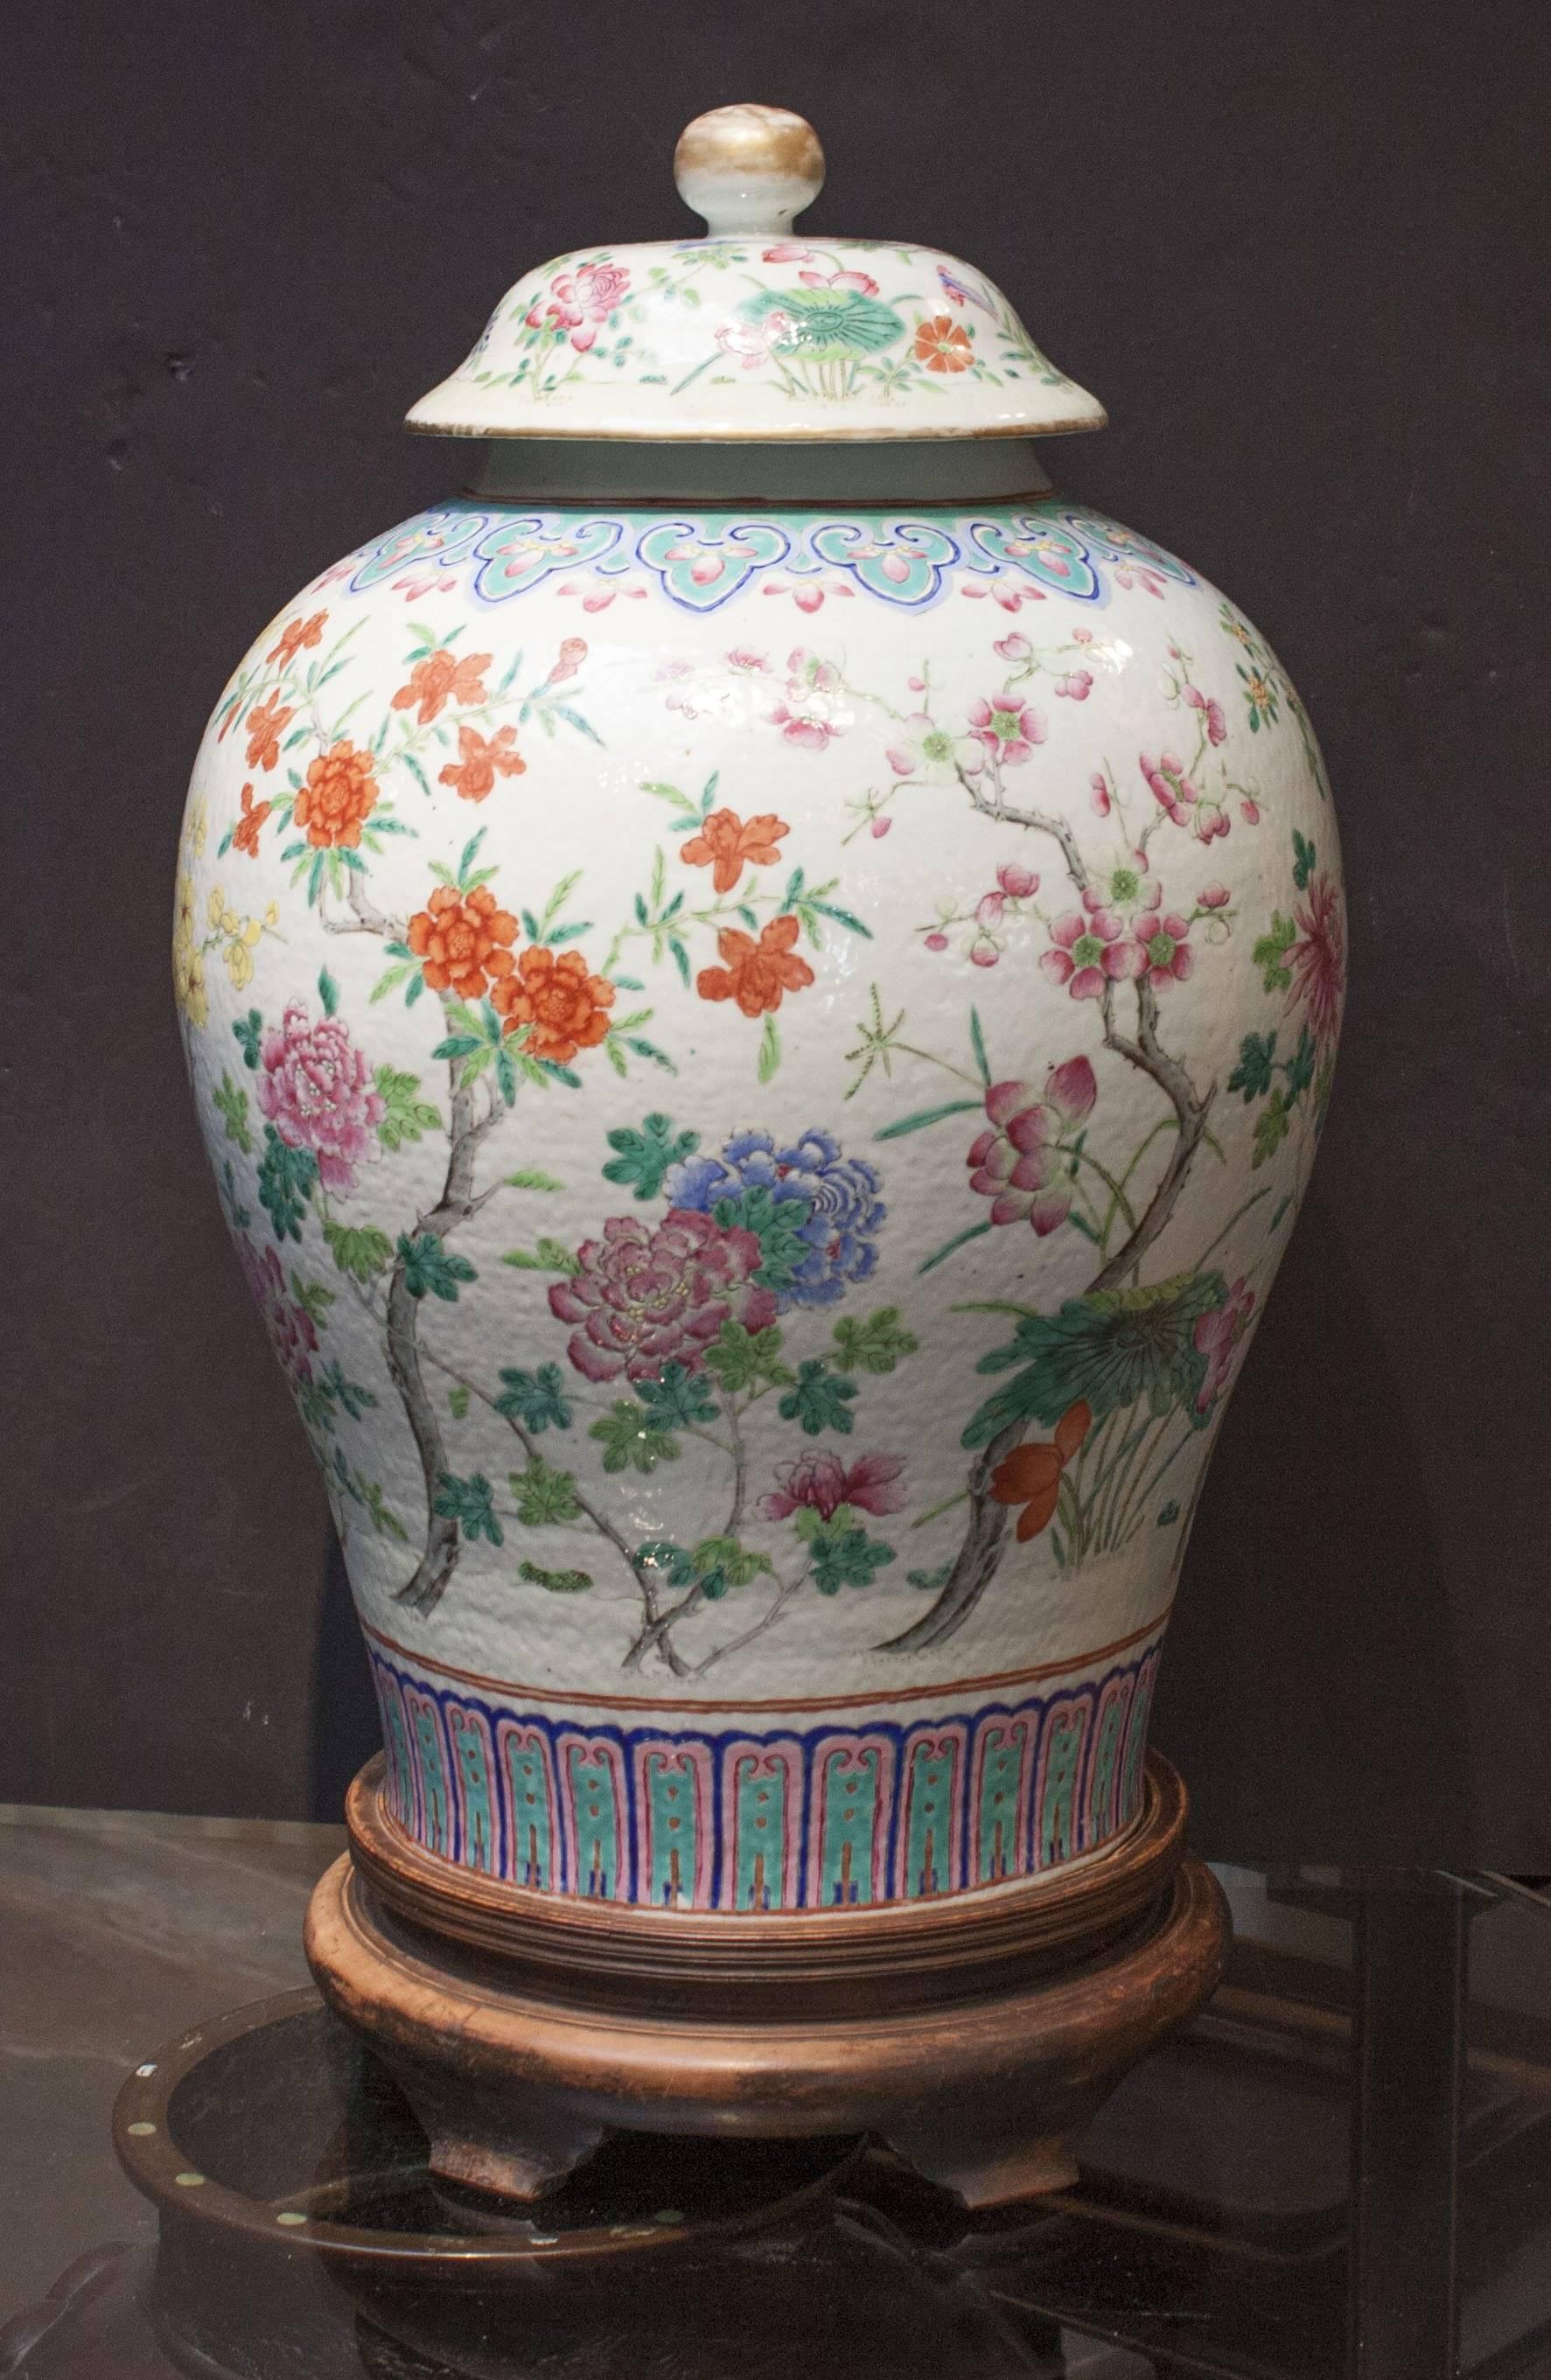 Well potted and beautifully enameled, this baluster jar displays gracious proportions, with a squat neck set on broad, and rounded shoulders that rise beautifully from the body, all set on a recessed foot and surmounted by the original lid. 

The